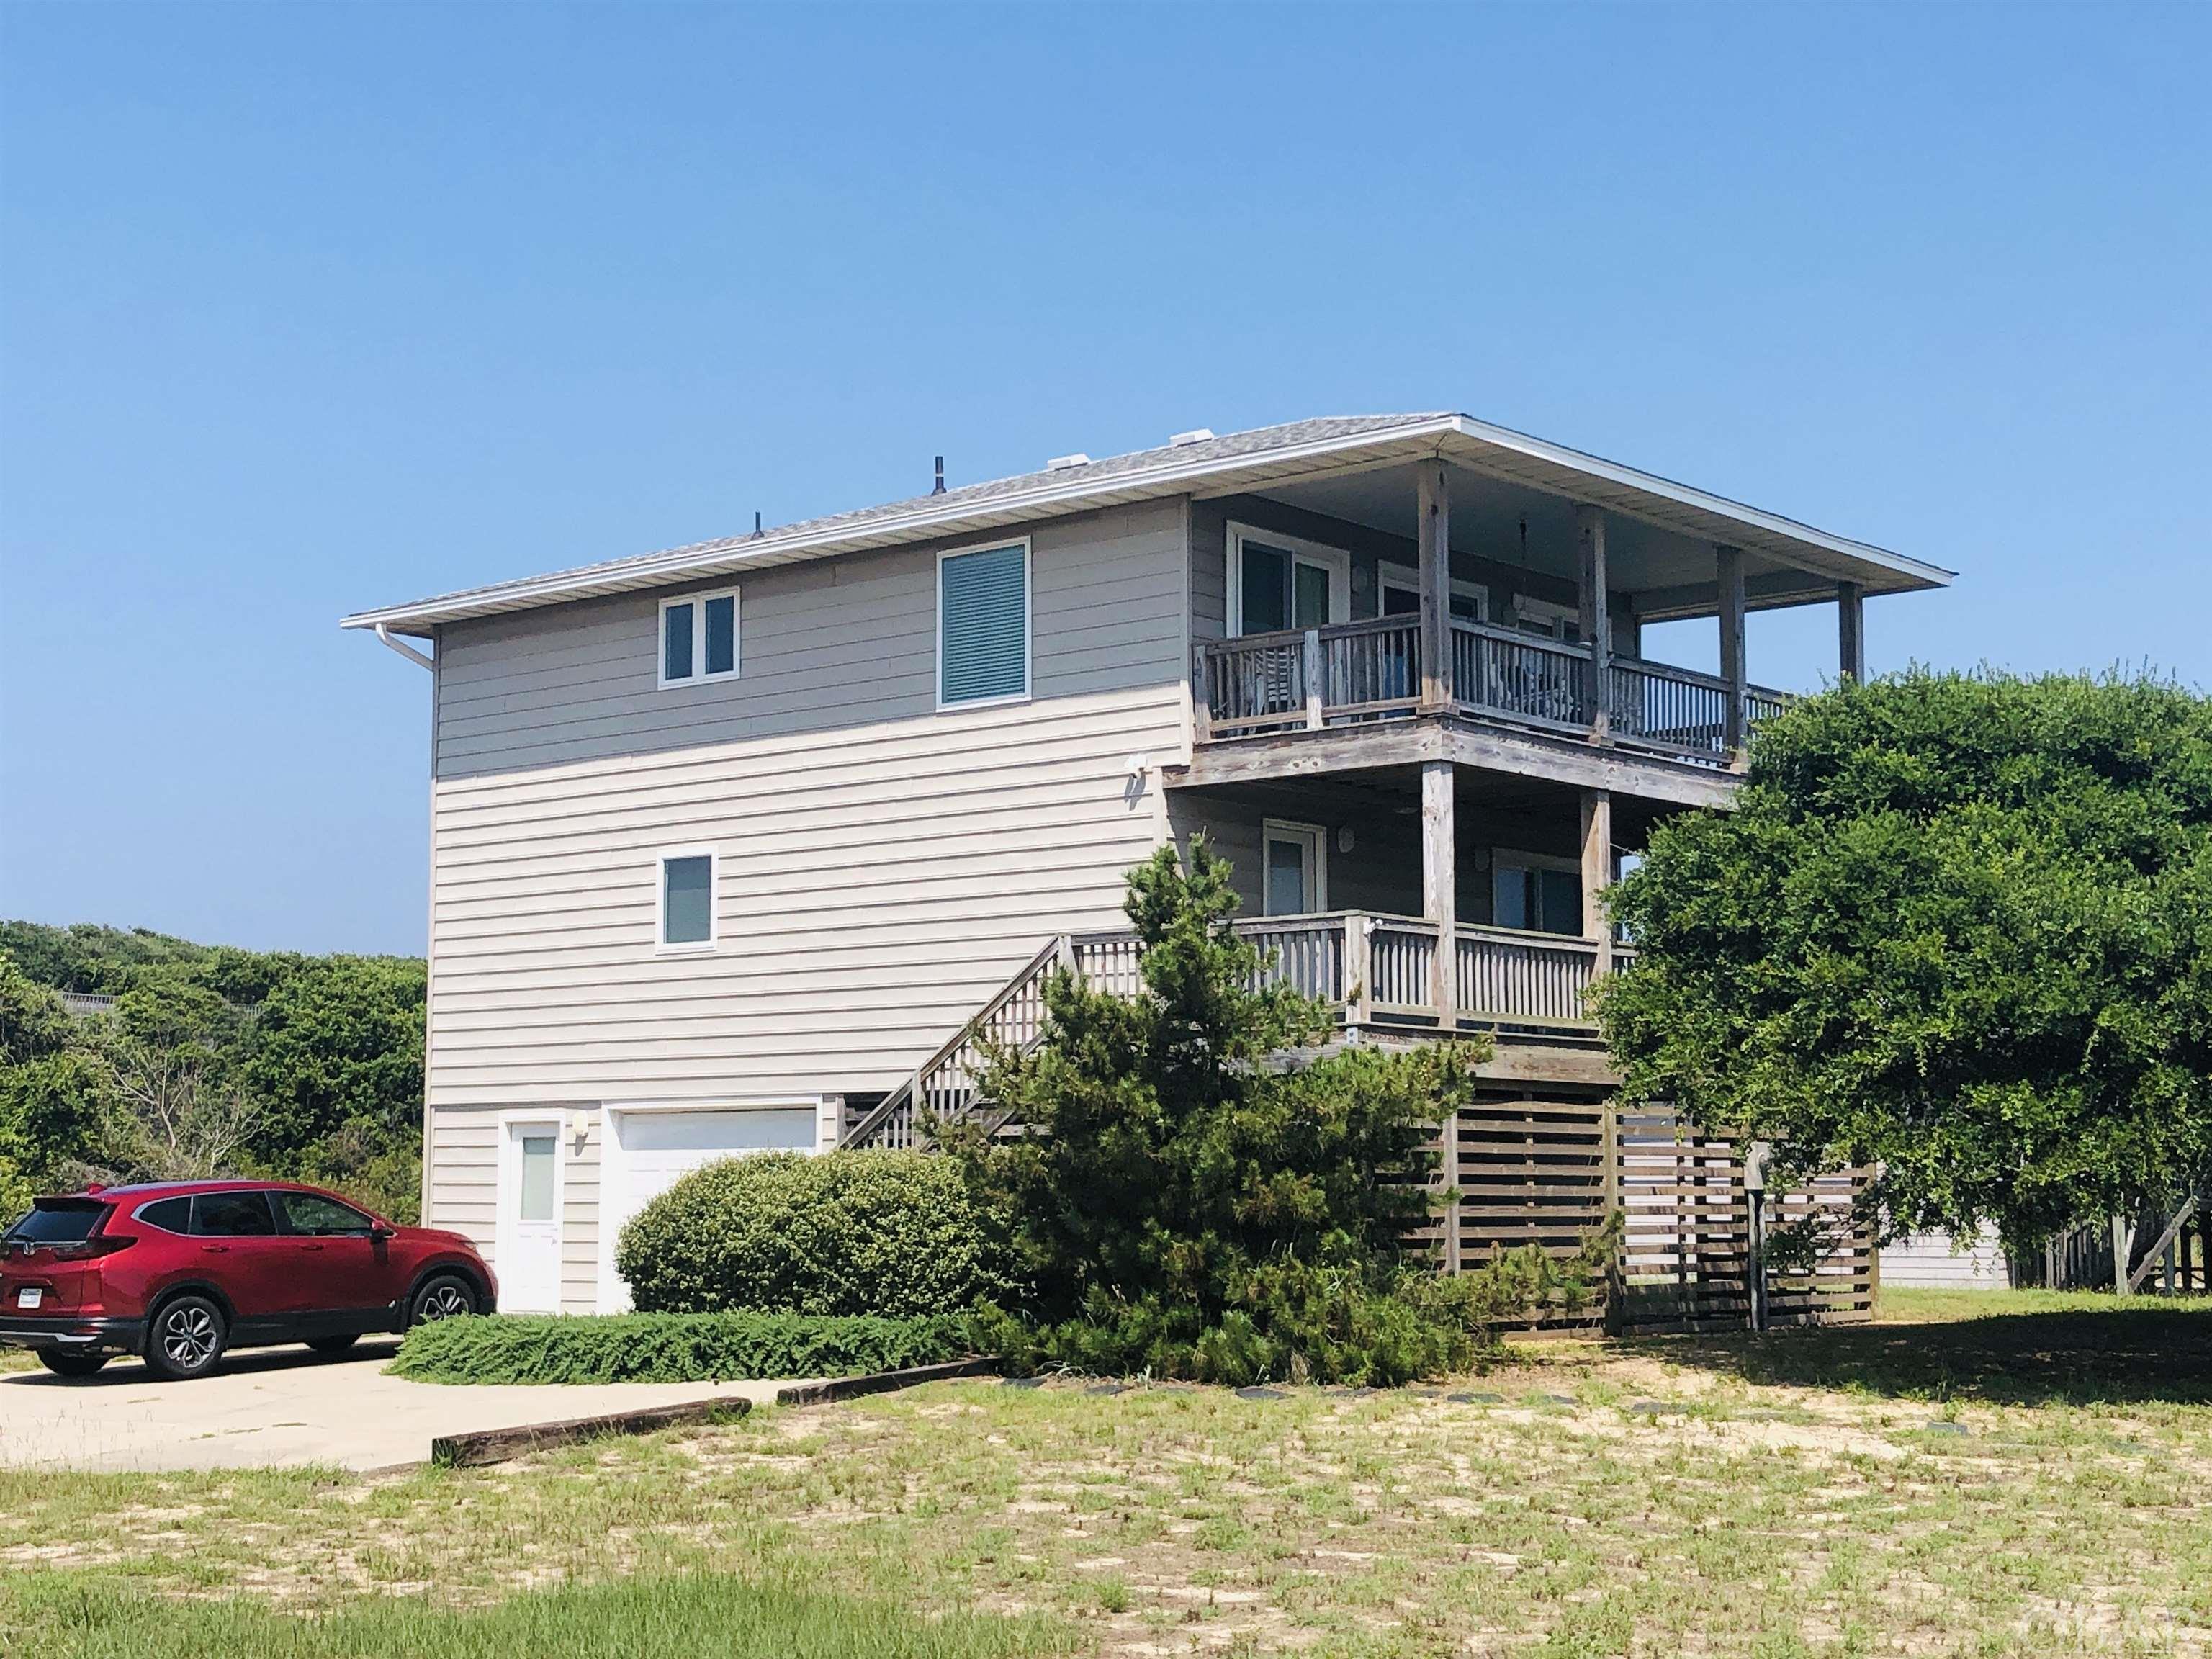 Okay Folks - Here is your chance to own a Move-in-Ready Well-Cared for Home in Oceanside Kitty Hawk with Direct Access to the Beach down Luke St (about 400 feet from the Beach Access). Comes with Million Dollar, Forever Unobstructed Panoramic Water Views down Luke Street. Less through traffic since part of Luke Street is one-way. The Home was renovated and had the back wing of the house expanded from the ground up with 390 SF of heated living space 2017, which was taken down to the studs, with the following List of Updates: Hydraulic Elevator to all floors; New Kitchen with Gorgeous Granite counters, Ceiling height White painted Wood Soft Close Cabinets & Doors, Subway Tile Backsplash and new appliances; Enlarged the upper Master Bedroom and added a Walk-in Closet and a Beautiful Ensuite with a Walk-in Shower; Large Walk-in Closets in the two rear Bedrooms on the middle floor; New 30 year Architectural Roof; New Gutters;  New Windows, Sliders and Window Treatments; New HVAC units inside and out; New Septic System; New Plumbing & Water Lines throughout; Deck renovations with roof extension to create a covered Deck; New Flooring throughout; Rocker Panel light switches & Lever Door Handles Installed throughout; Many new fixtures throughout (ceiling fans, bathroom vanities, toilets, mirrors, towel bars, medicine cabinets & faucets); Has a Large Storage Room on the ground floor; plus added an Oversized 1 Car Garage with an automatic Garage door opener which creates a Dry Entrance. Second Floor Bathroom remodeled 2021. Water Heater replaced 12/22. Three Spacious Bedrooms on the middle Floor with a Full Hall Bathroom with Tub shared with the east Bedroom, plus the Laundry is located on this level with full-sized Washer & Dryer. Upper Level has Incredible Ocean Views, an Open Floor Plan with Sliders going out to a covered Deck, a Half Bath, a Beautiful Fully renovated modern Kitchen, and a Large Bedroom w/Ensuite and 3 Large Closets. Large 15,000 SF Lot should accommodate a 12' by 24' pool. So close to the Beach yet located in a No Flood "X" Zone. Used a primary home for over 20 years.